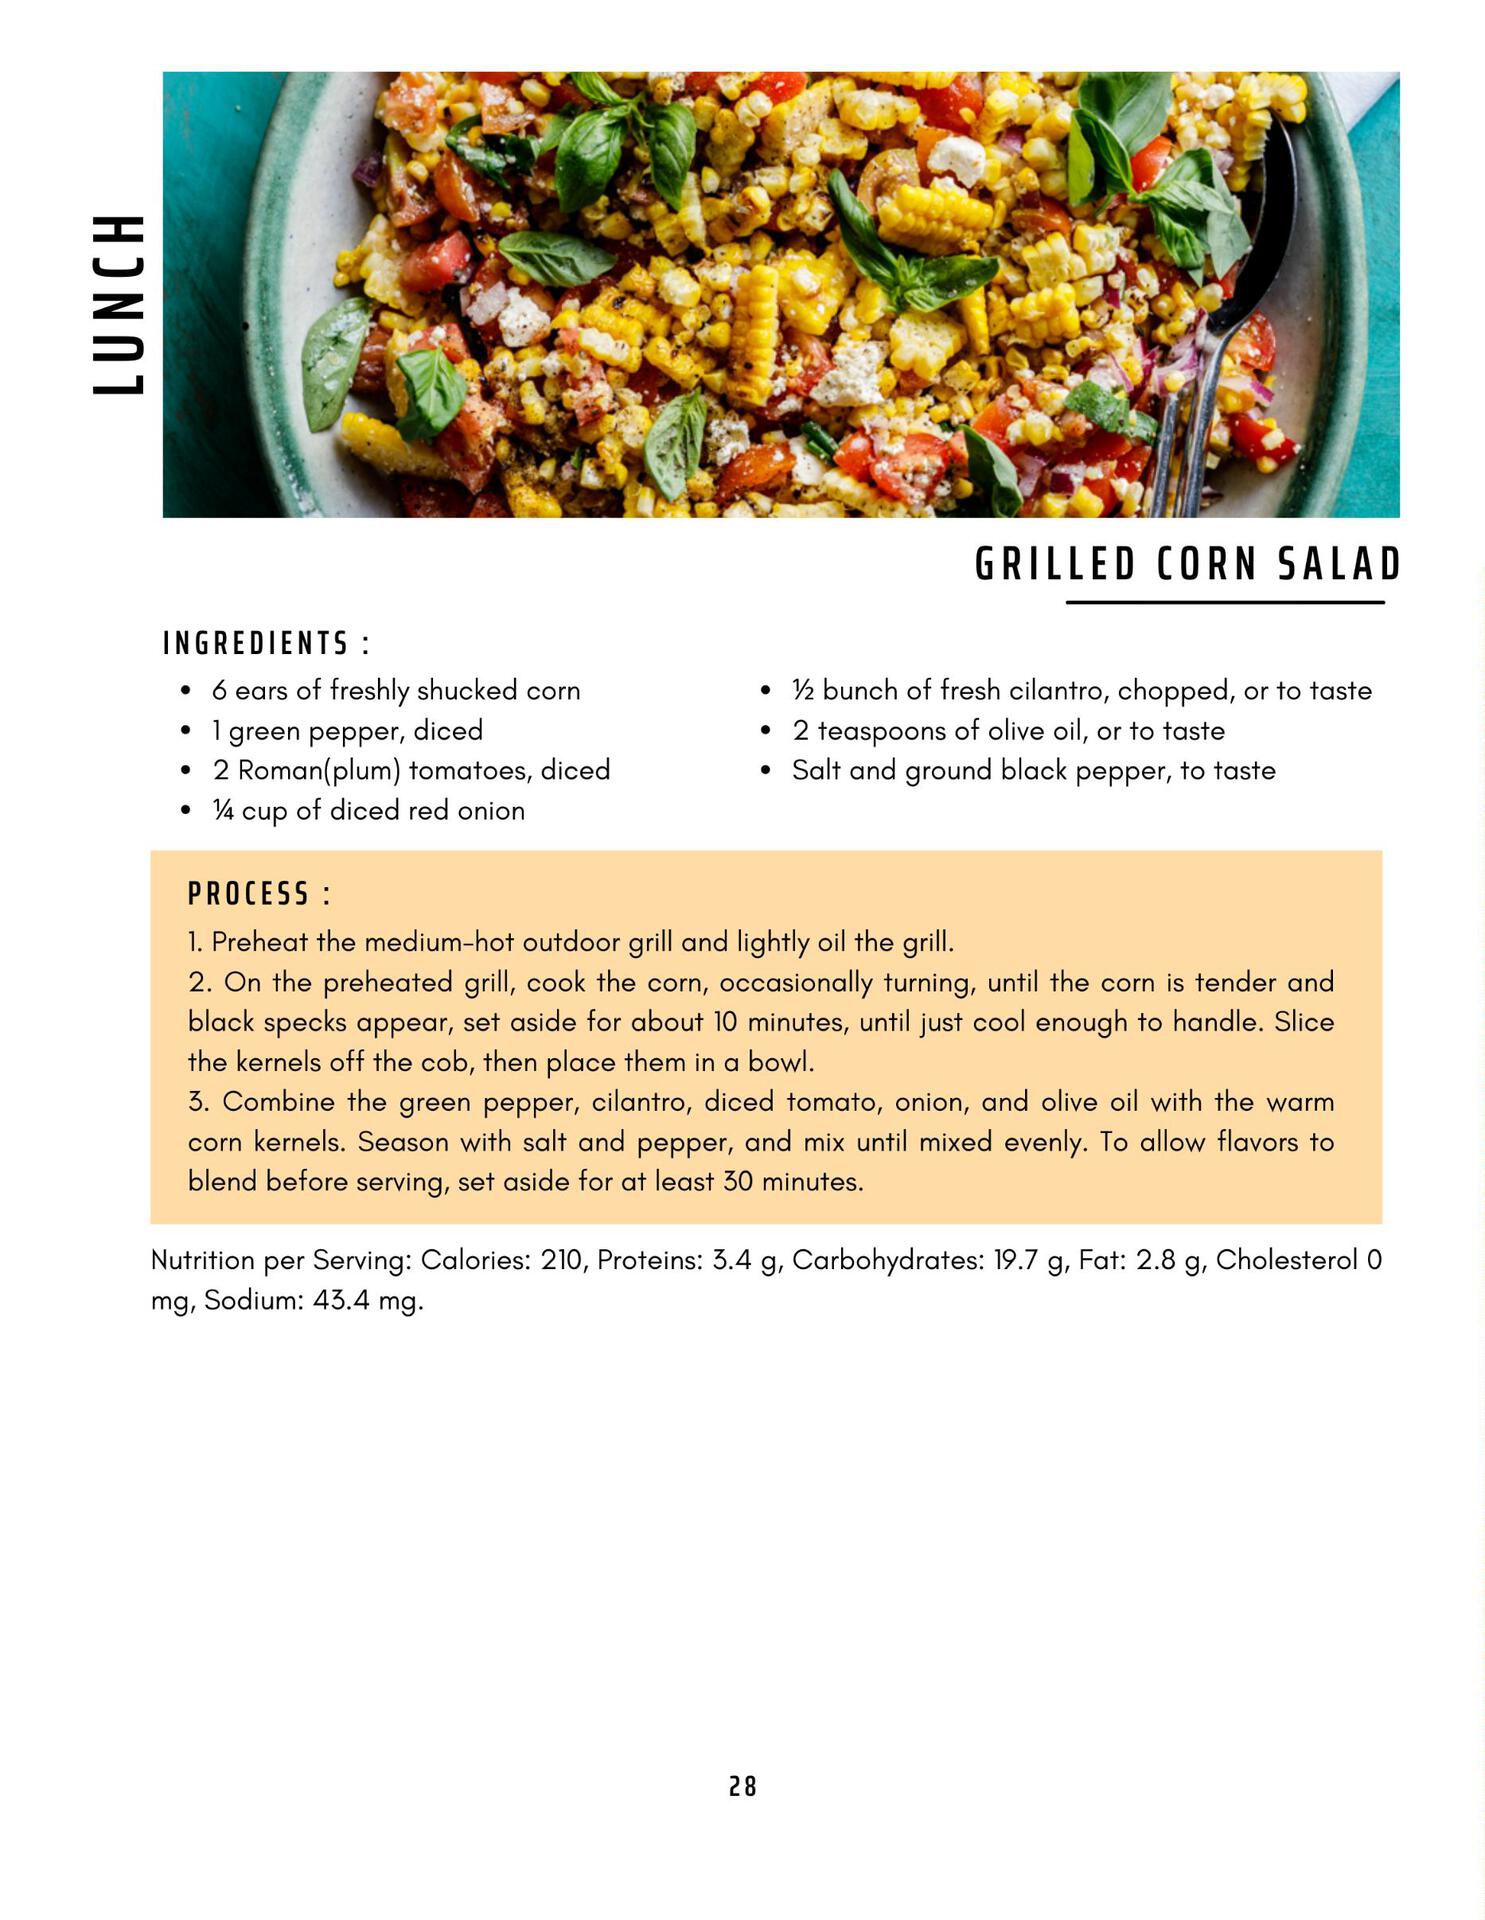 The New Lean and Green Diet Cookbook for Beginners 150 Quick Easy and Mouthwatering Recipes for Beginners with Full Color Image to Heal and Nourish Your Body from the Inside Out - photo 29